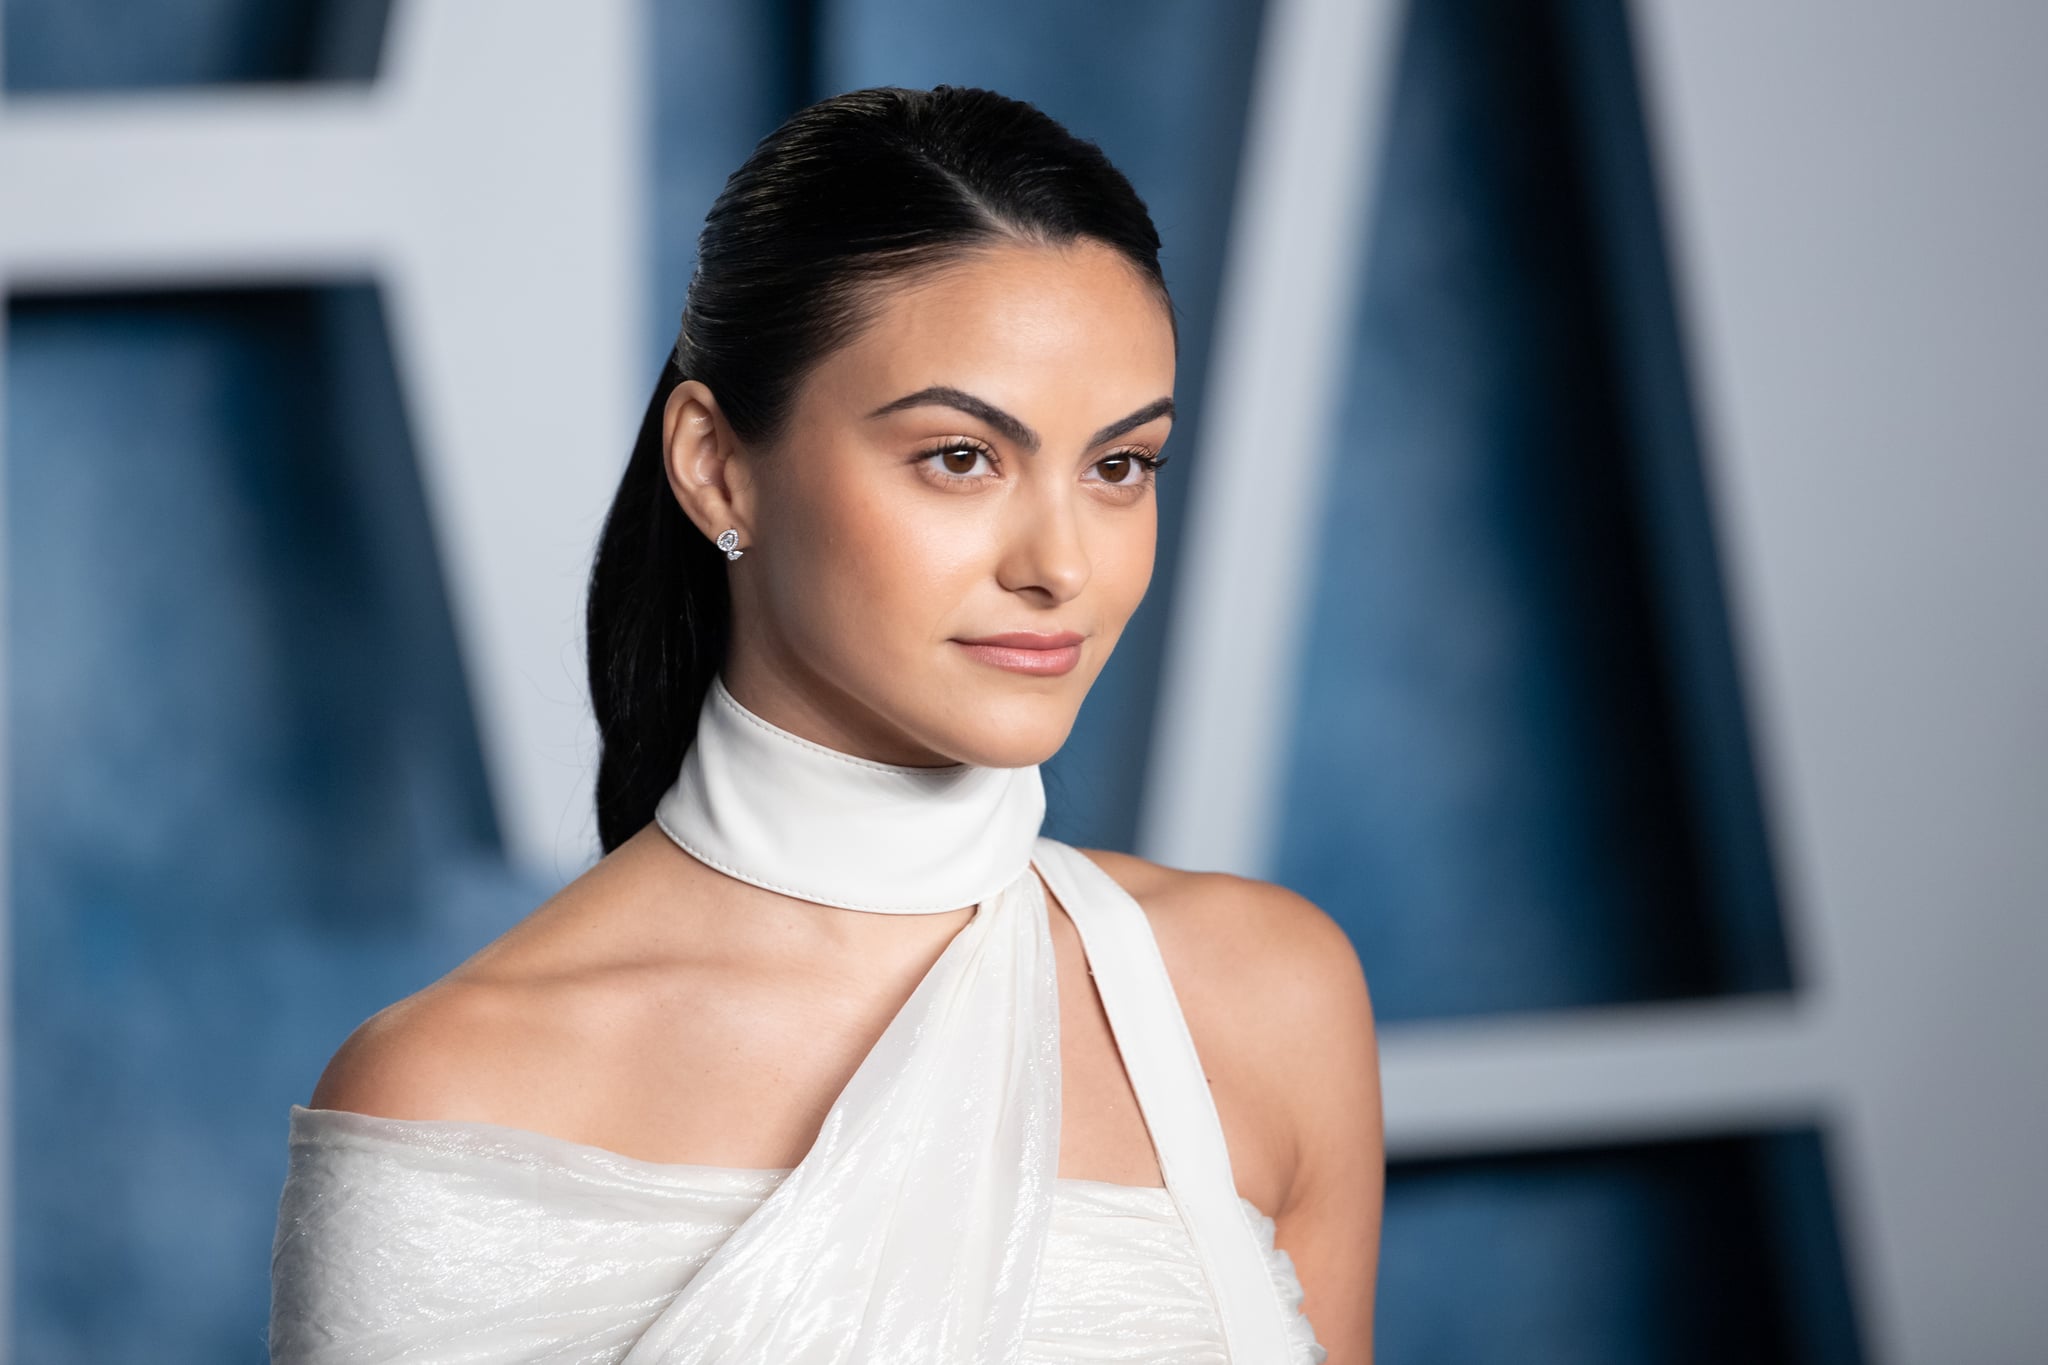 BEVERLY HILLS, CALIFORNIA - MARCH 12: Camila Mendes arrives at the Vanity Fair Oscar Party hosted by Radhika Jones at Wallis Annenberg Centre for the Performing Arts on March 12, 2023 in Beverly Hills, California. (Photo by Robert Smith/Patrick McMullan via Getty Images)